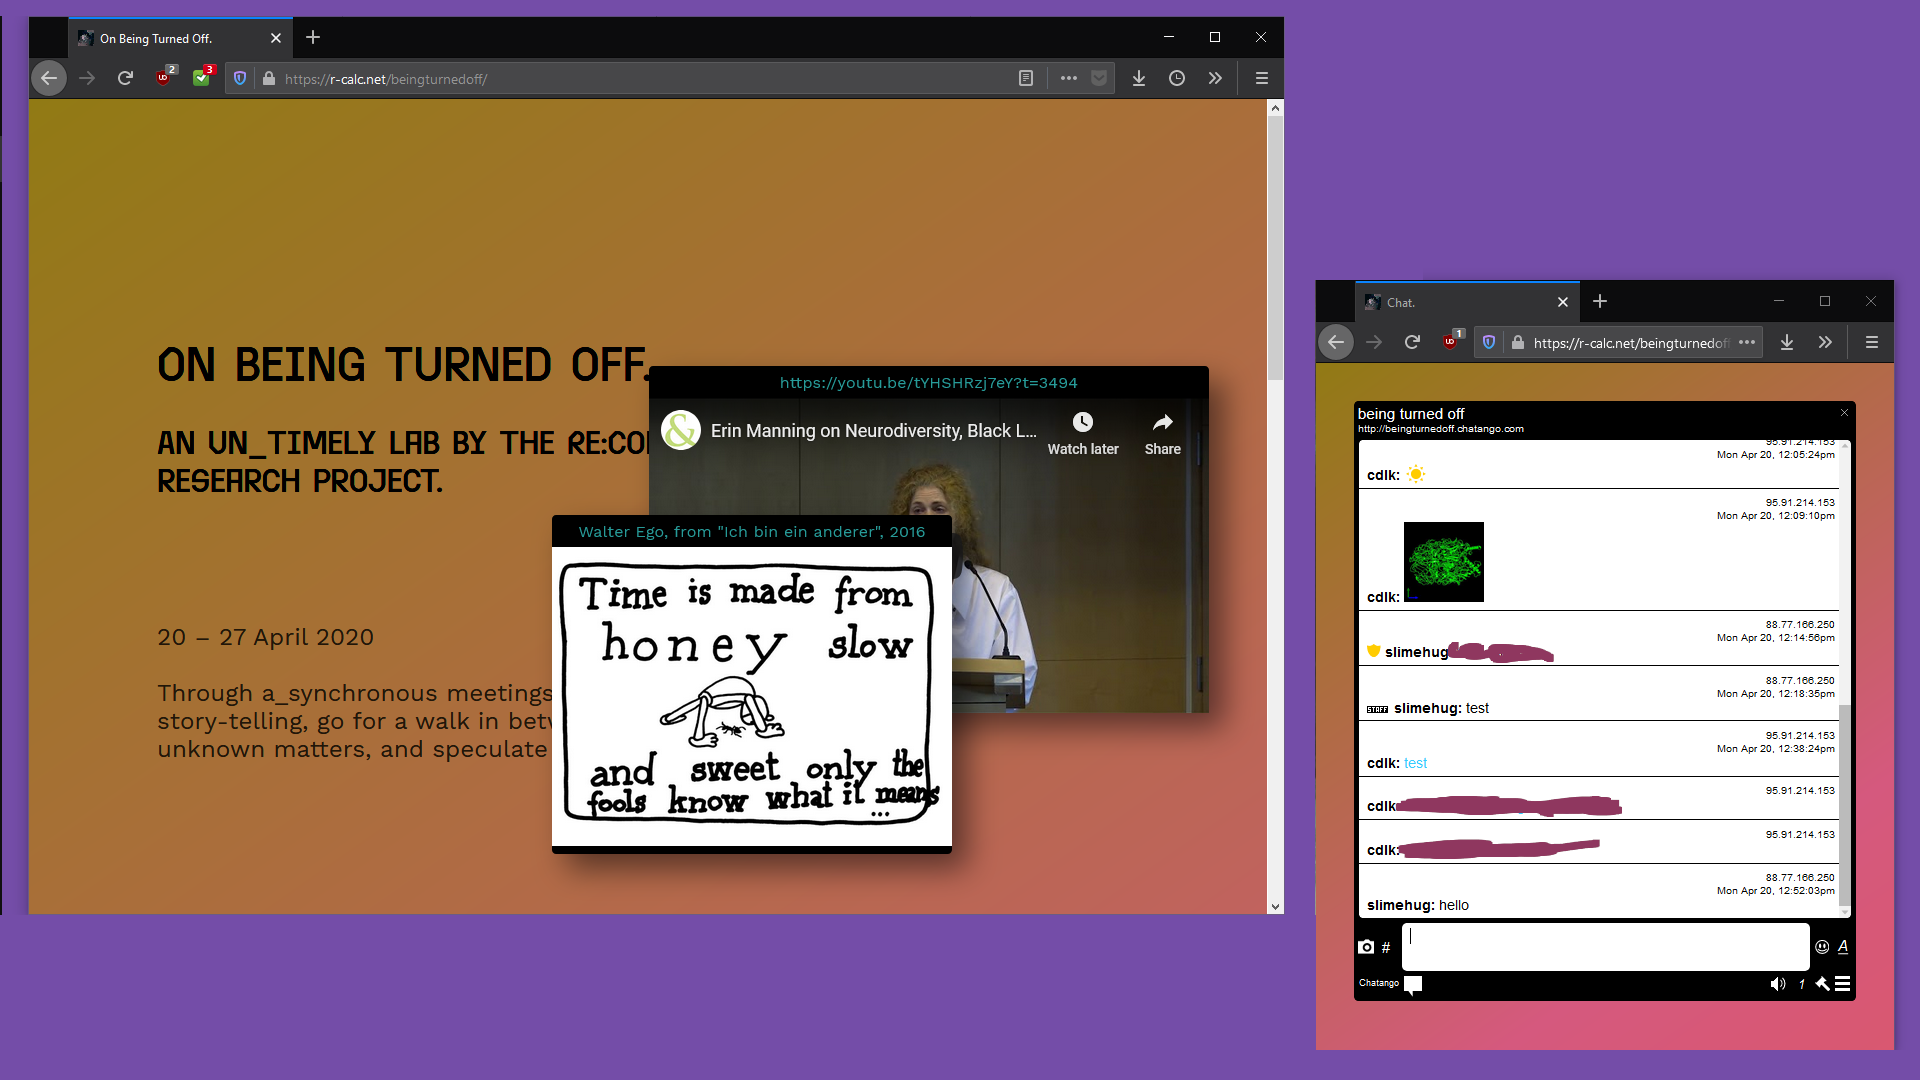 Two browser windows on an empty desktop. The smaller one shows a chat interface, ‘slimehug’ and ‘cdlk’ are chatting. The larger window shows the lab website. An image floating on top of it reads “Time is made from honey - slow and sweet only the fools know what it means“. Behind this image is placed a youtube video, titled ‘Erin Manning on Neurodiversity, Black Life and the University as We Know It’.